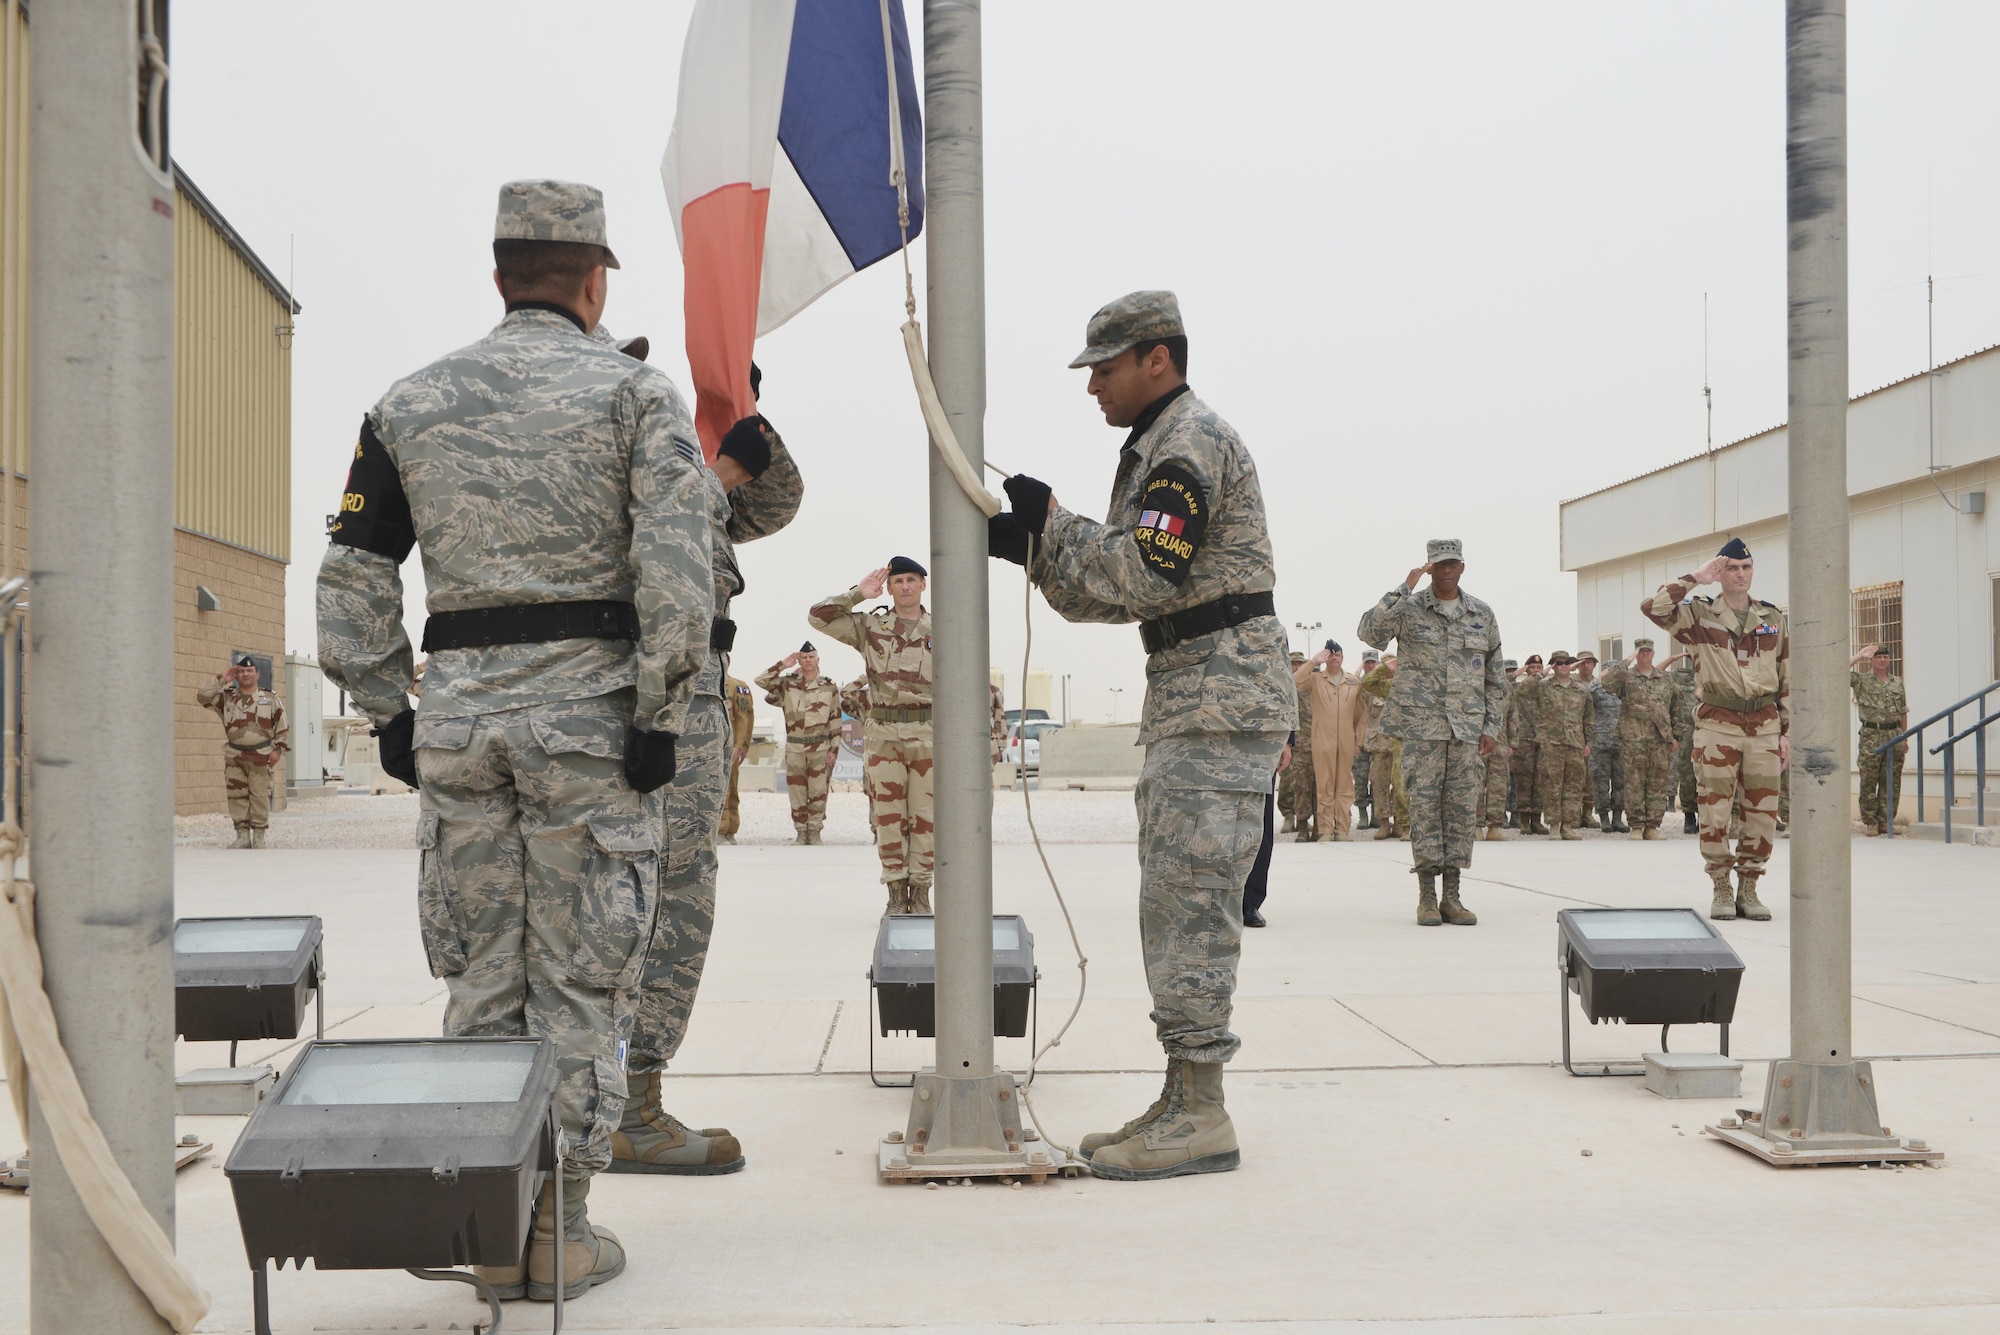 Members from the 379h Air Expeditionary Wing base honor guard prepare to raise the French national flag to begin the Bastille Day ceremony July 14, 2015 at Al Udeid Air Base, Qatar. The French celebrate July 14th as Bastille Day to commemorate the storming of Bastille at the beginning of the French revolution in 1789. (U.S. Air Force photo/Staff Sgt. Alexandre Montes)